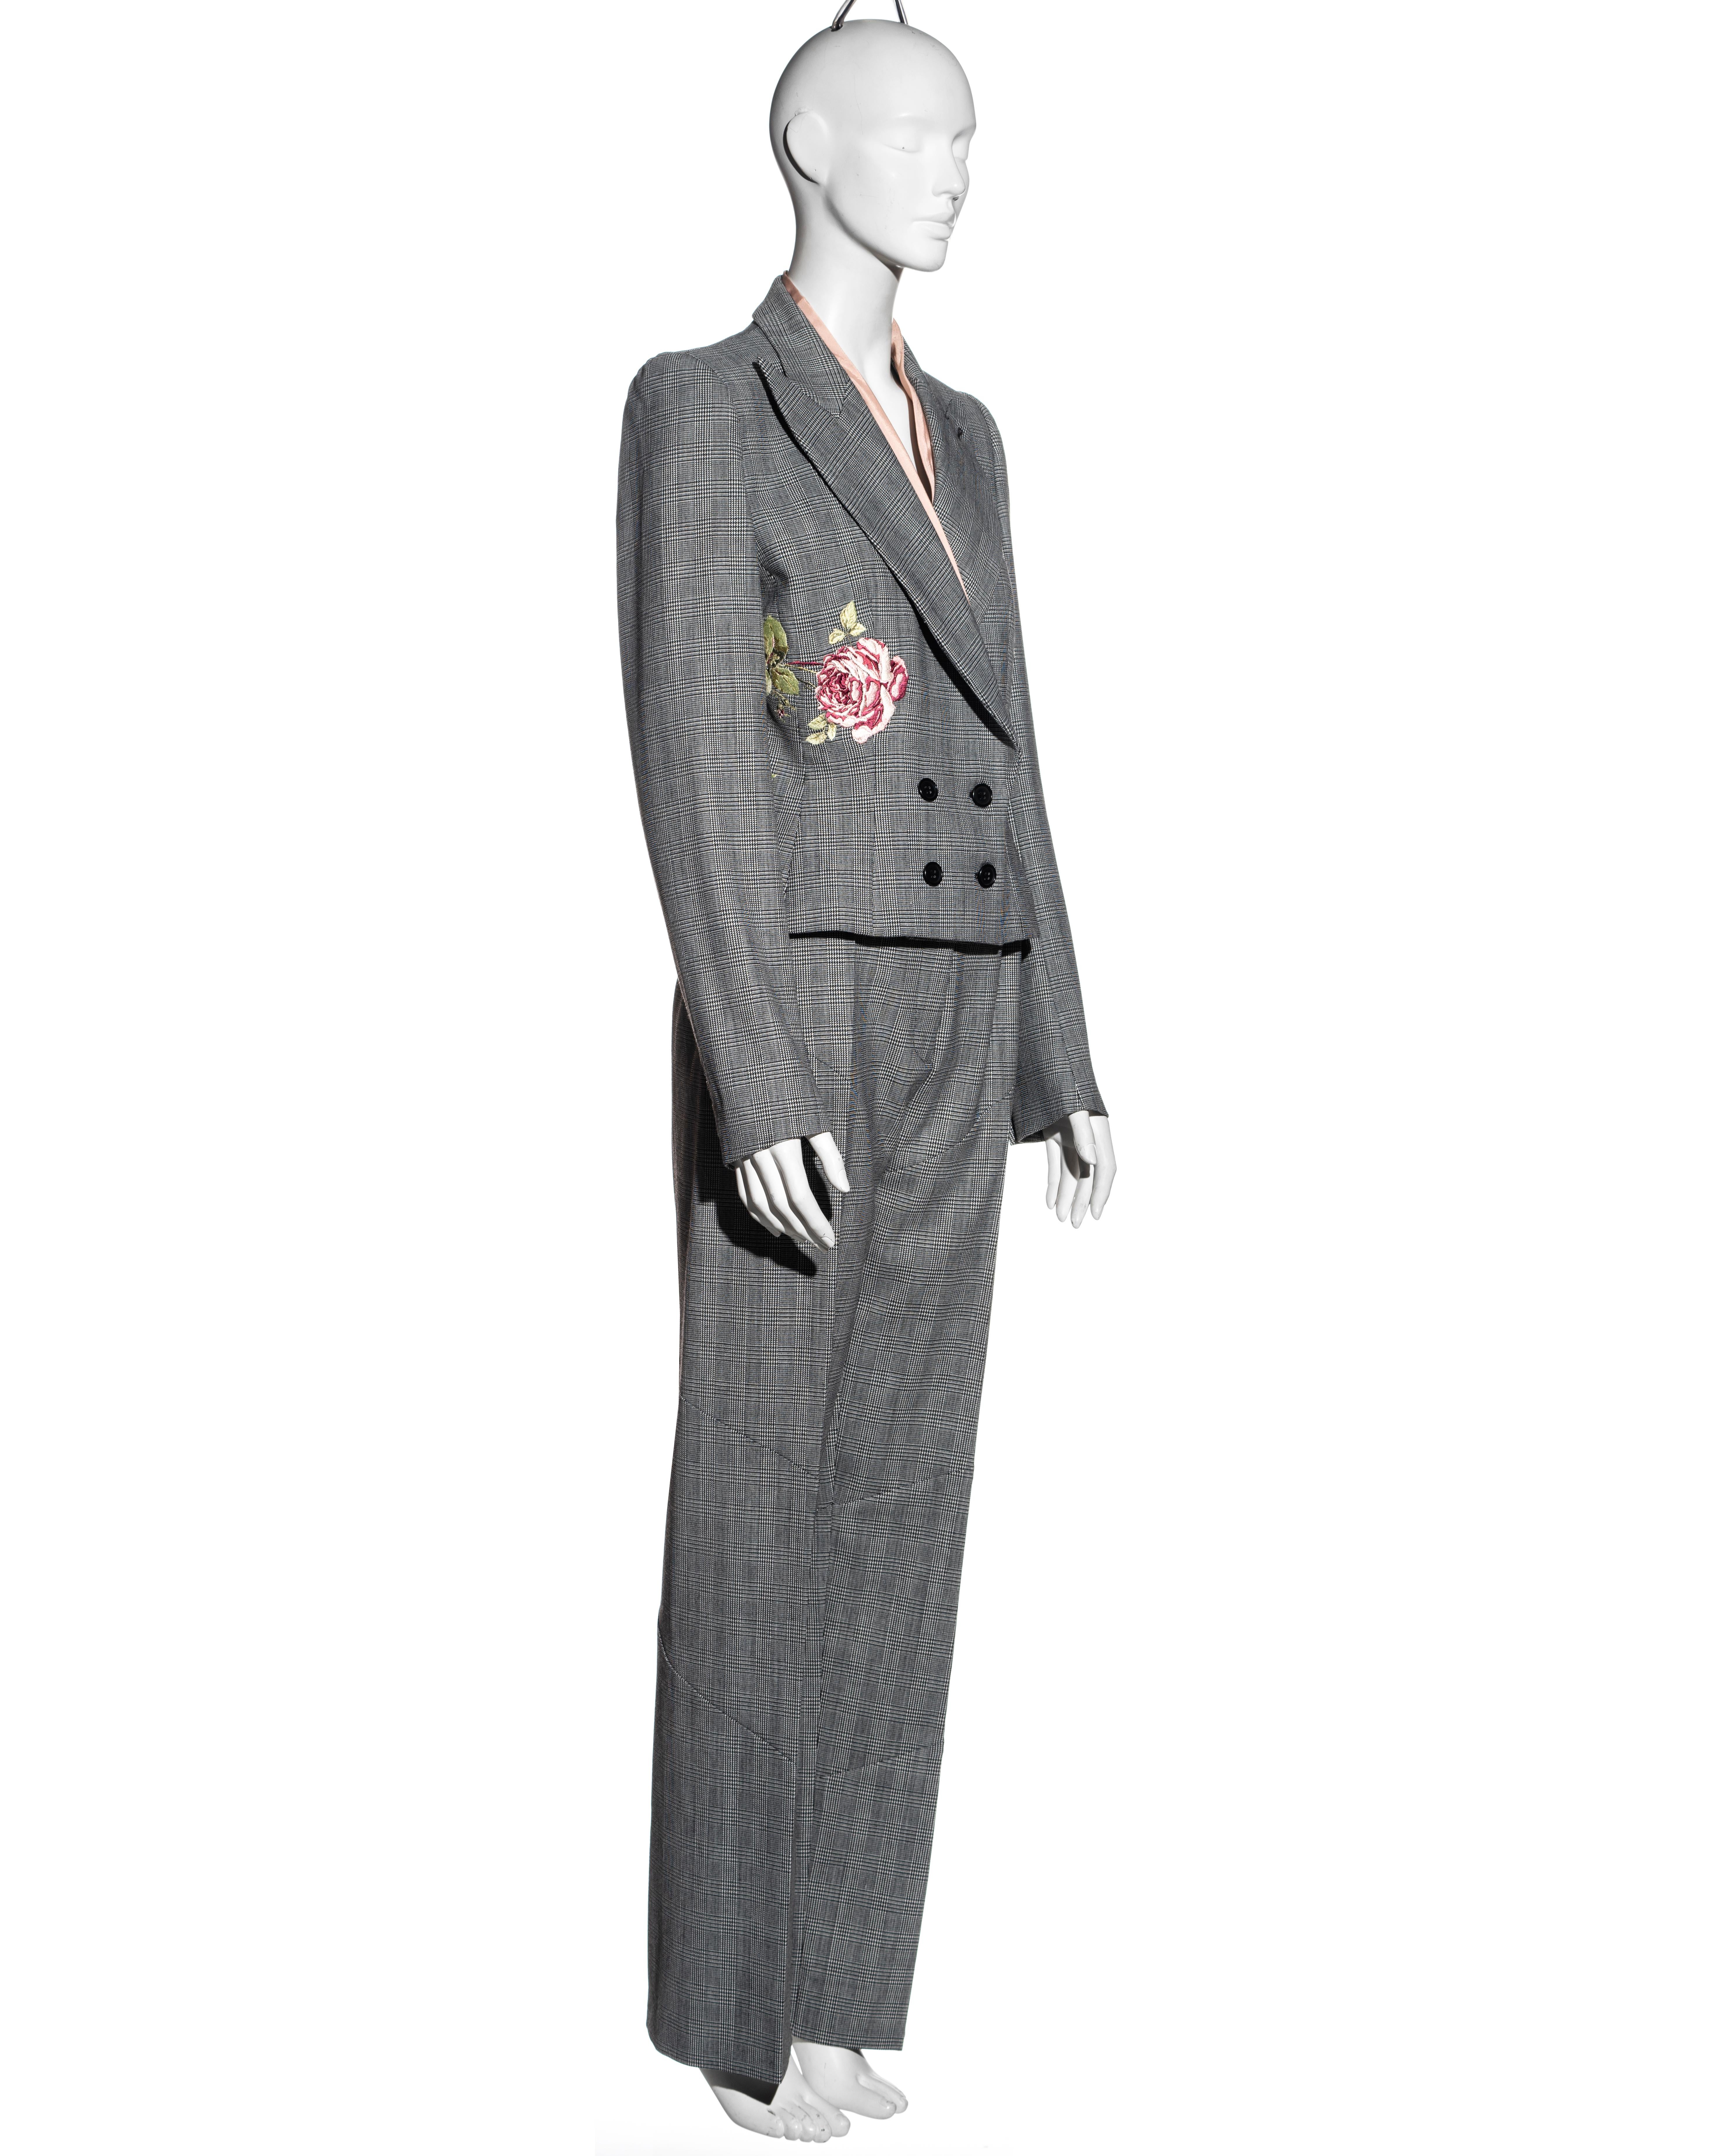 Alexander McQueen Prince of Wales checked suit with rose embroidery, fw 1997 In Excellent Condition For Sale In London, GB